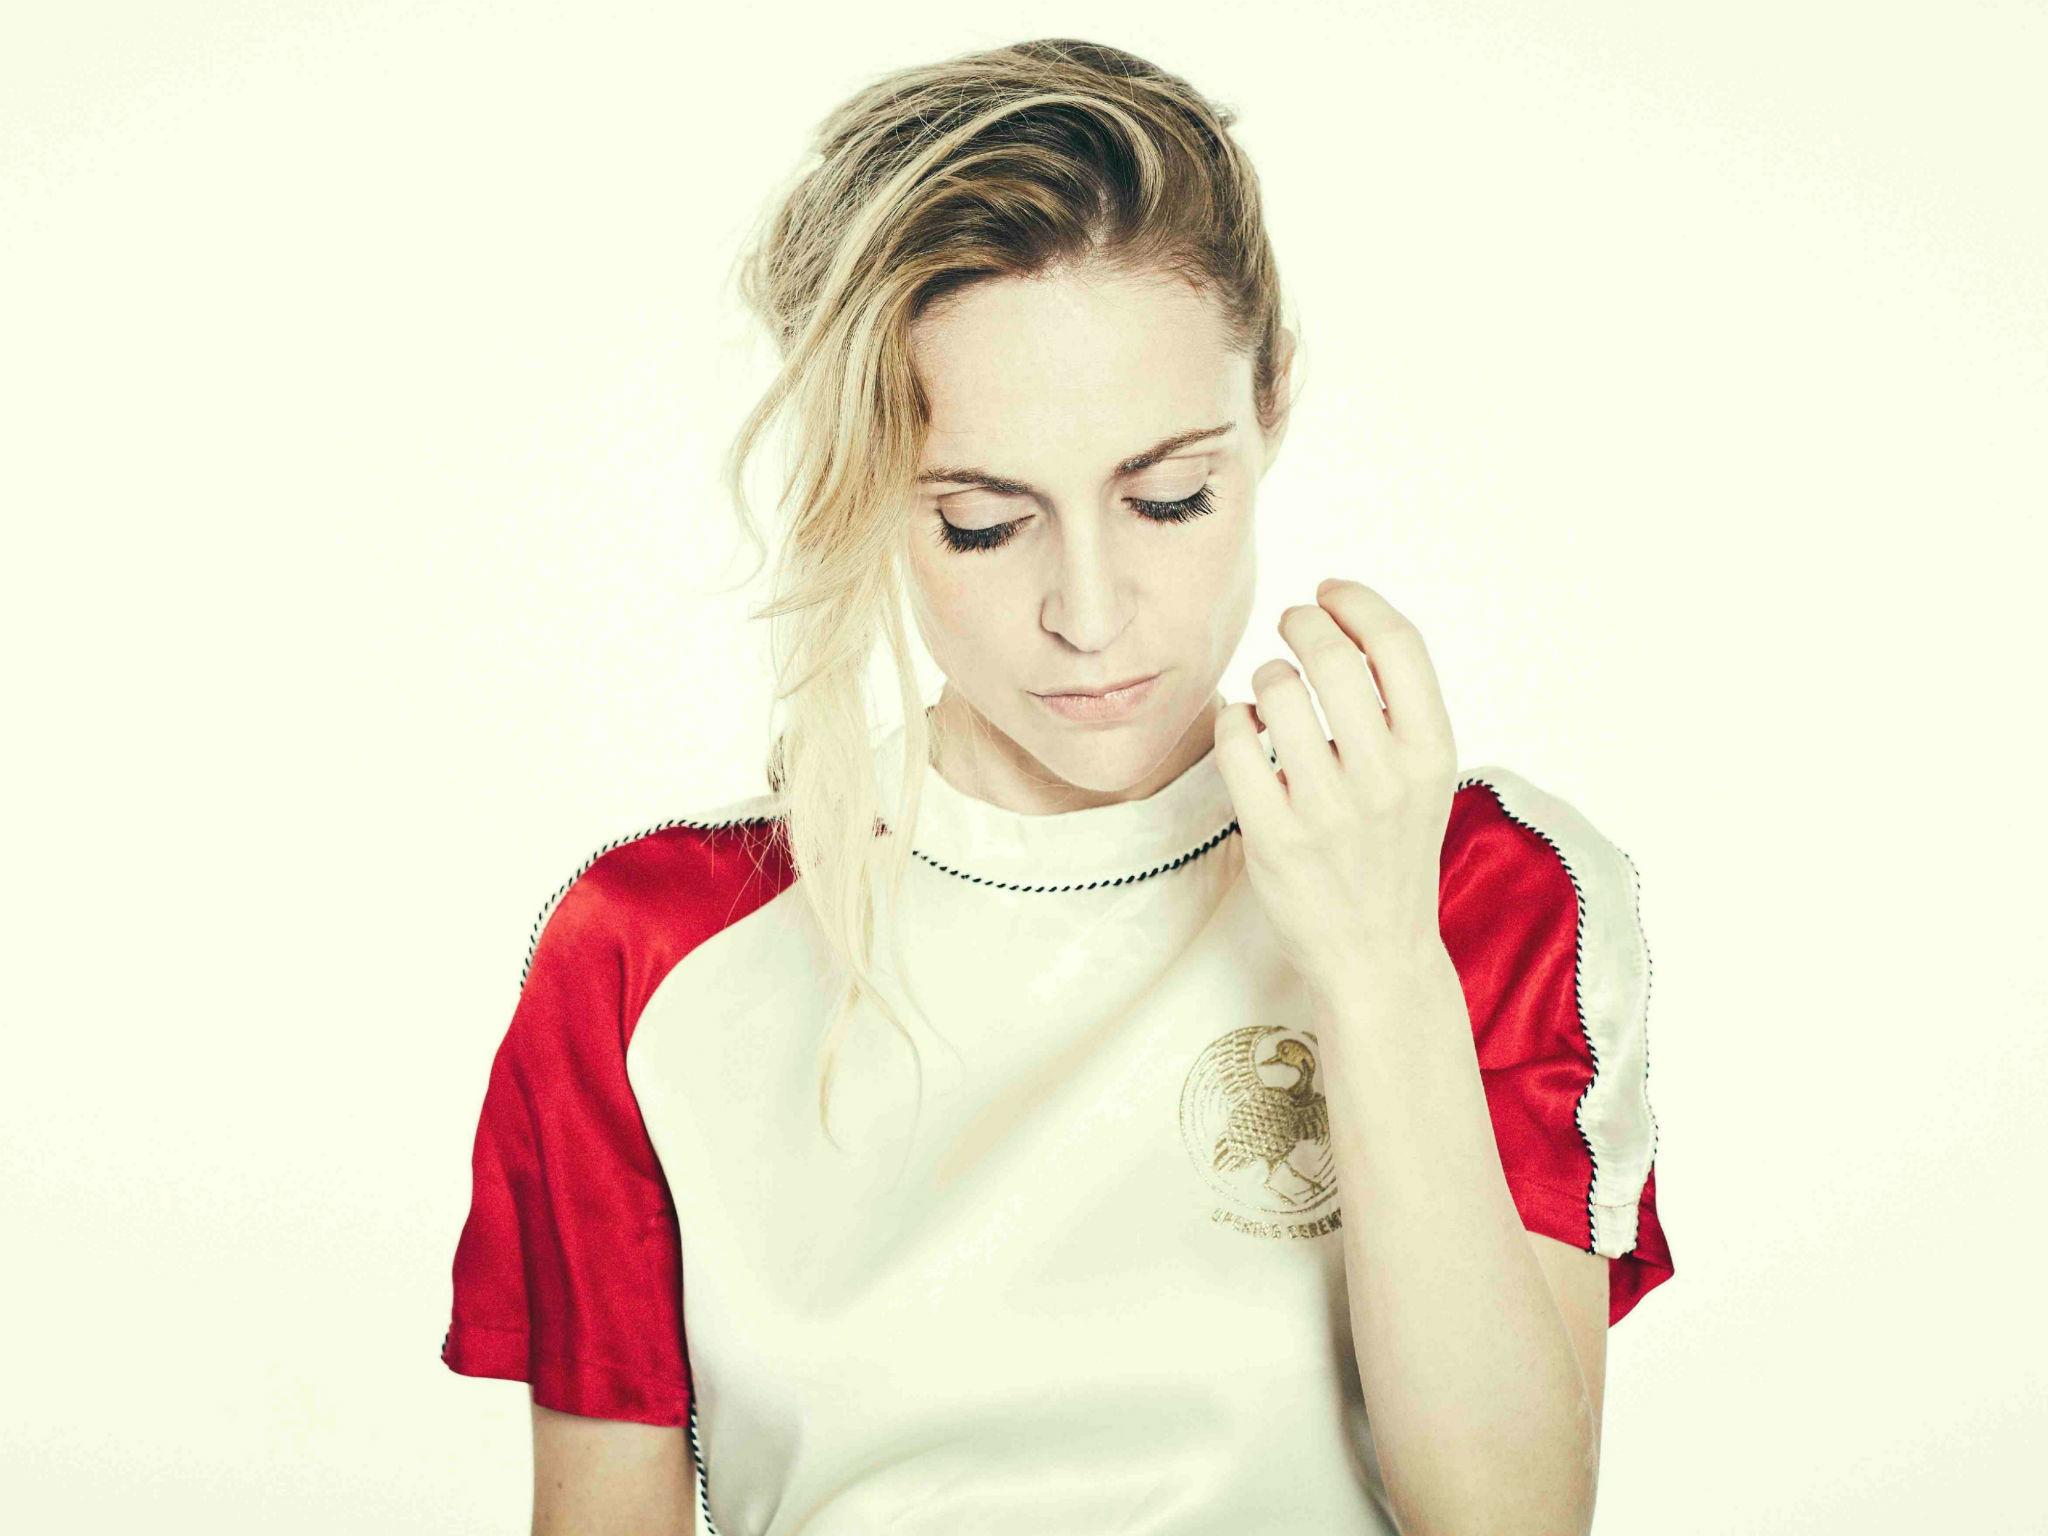 The Berlin-based musician, Agnes Obel, is releasing her new album, Citizen of Glass, later this month